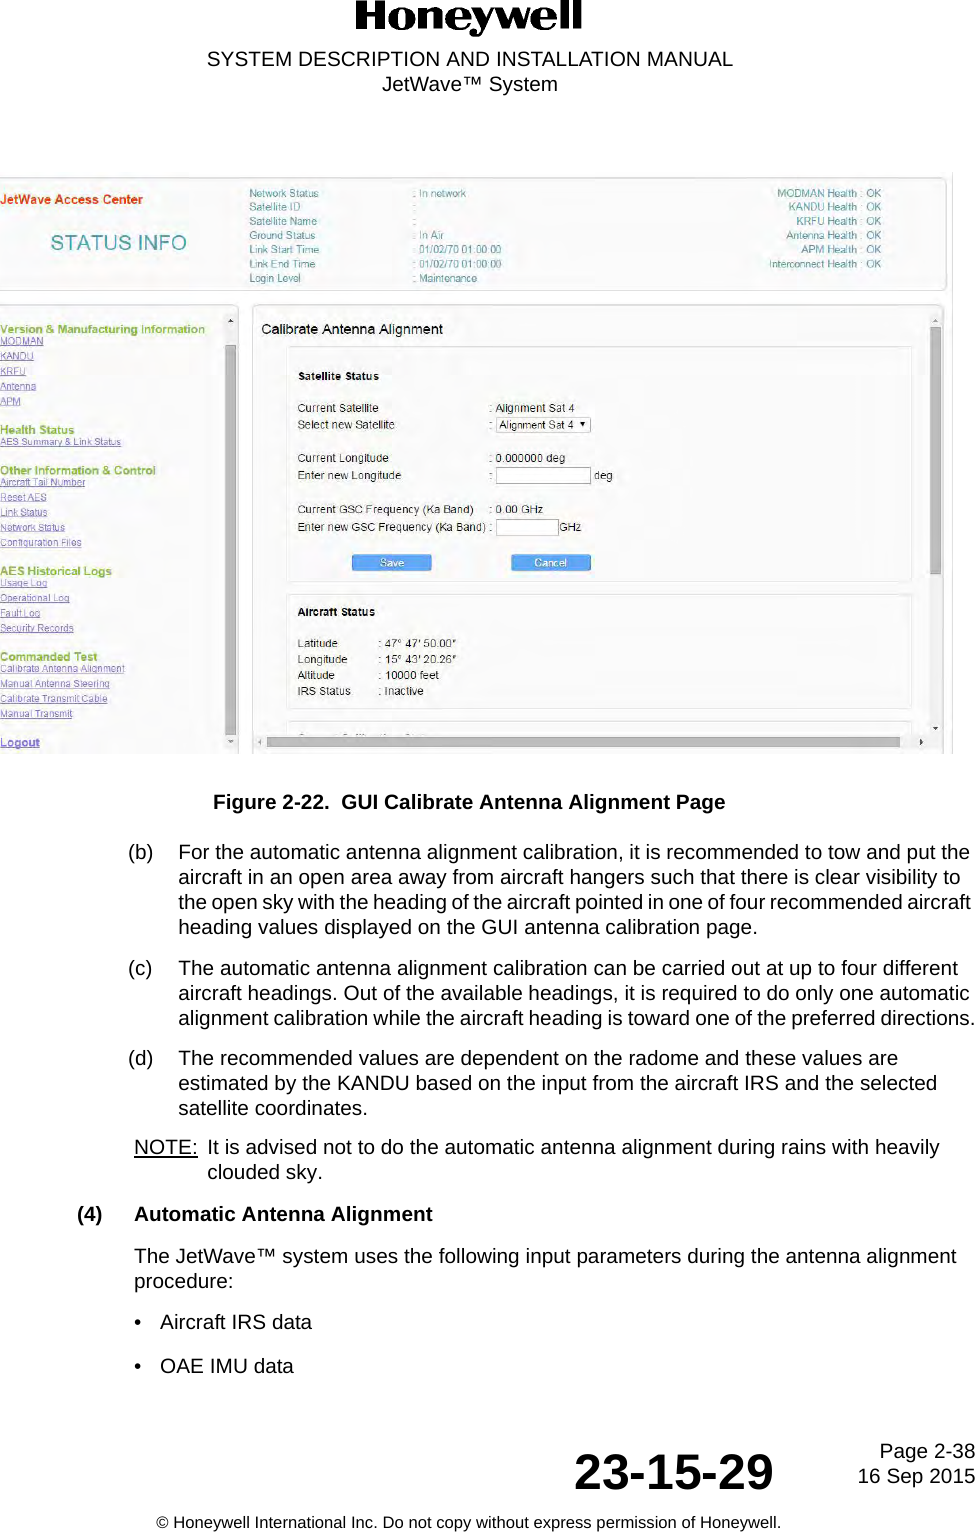 Page 2-38 16 Sep 201523-15-29SYSTEM DESCRIPTION AND INSTALLATION MANUALJetWave™ System© Honeywell International Inc. Do not copy without express permission of Honeywell.Figure 2-22.  GUI Calibrate Antenna Alignment Page(b) For the automatic antenna alignment calibration, it is recommended to tow and put the aircraft in an open area away from aircraft hangers such that there is clear visibility to the open sky with the heading of the aircraft pointed in one of four recommended aircraft heading values displayed on the GUI antenna calibration page. (c) The automatic antenna alignment calibration can be carried out at up to four different aircraft headings. Out of the available headings, it is required to do only one automatic alignment calibration while the aircraft heading is toward one of the preferred directions.(d) The recommended values are dependent on the radome and these values are estimated by the KANDU based on the input from the aircraft IRS and the selected satellite coordinates.NOTE: It is advised not to do the automatic antenna alignment during rains with heavily clouded sky.(4) Automatic Antenna AlignmentThe JetWave™ system uses the following input parameters during the antenna alignment procedure:• Aircraft IRS data• OAE IMU data